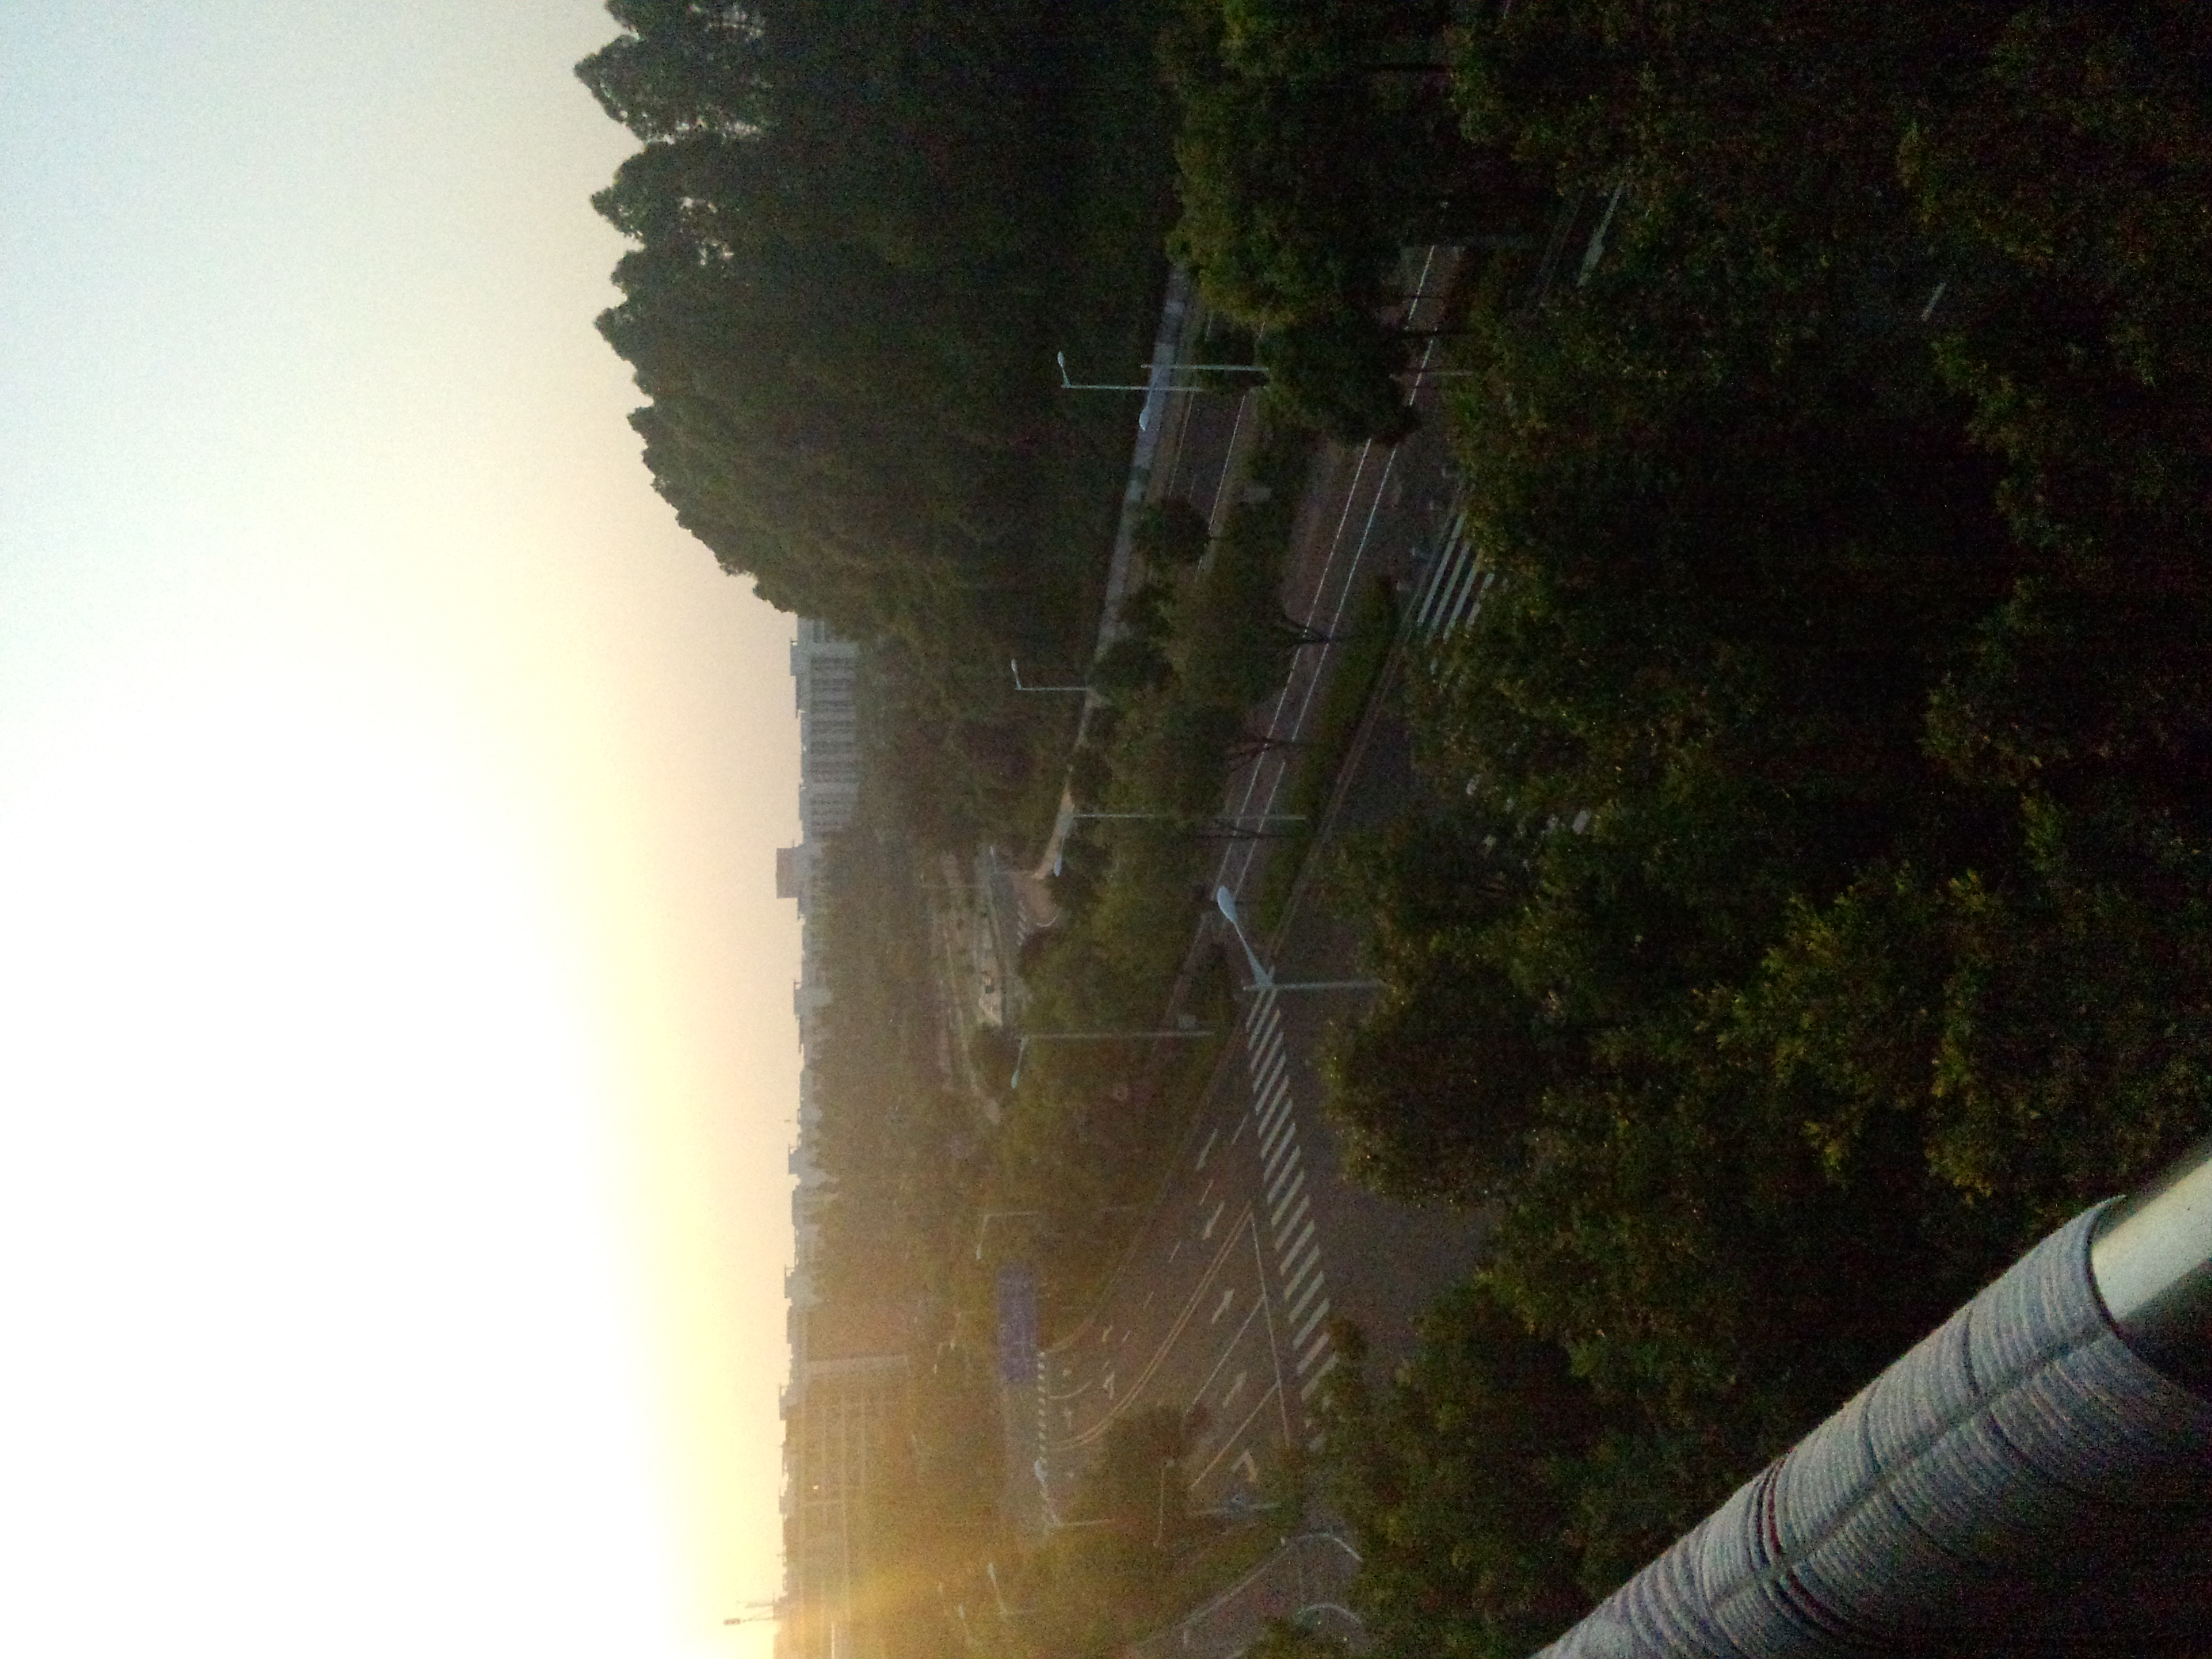 Sunrise when looking out from my dorm's balcony in university